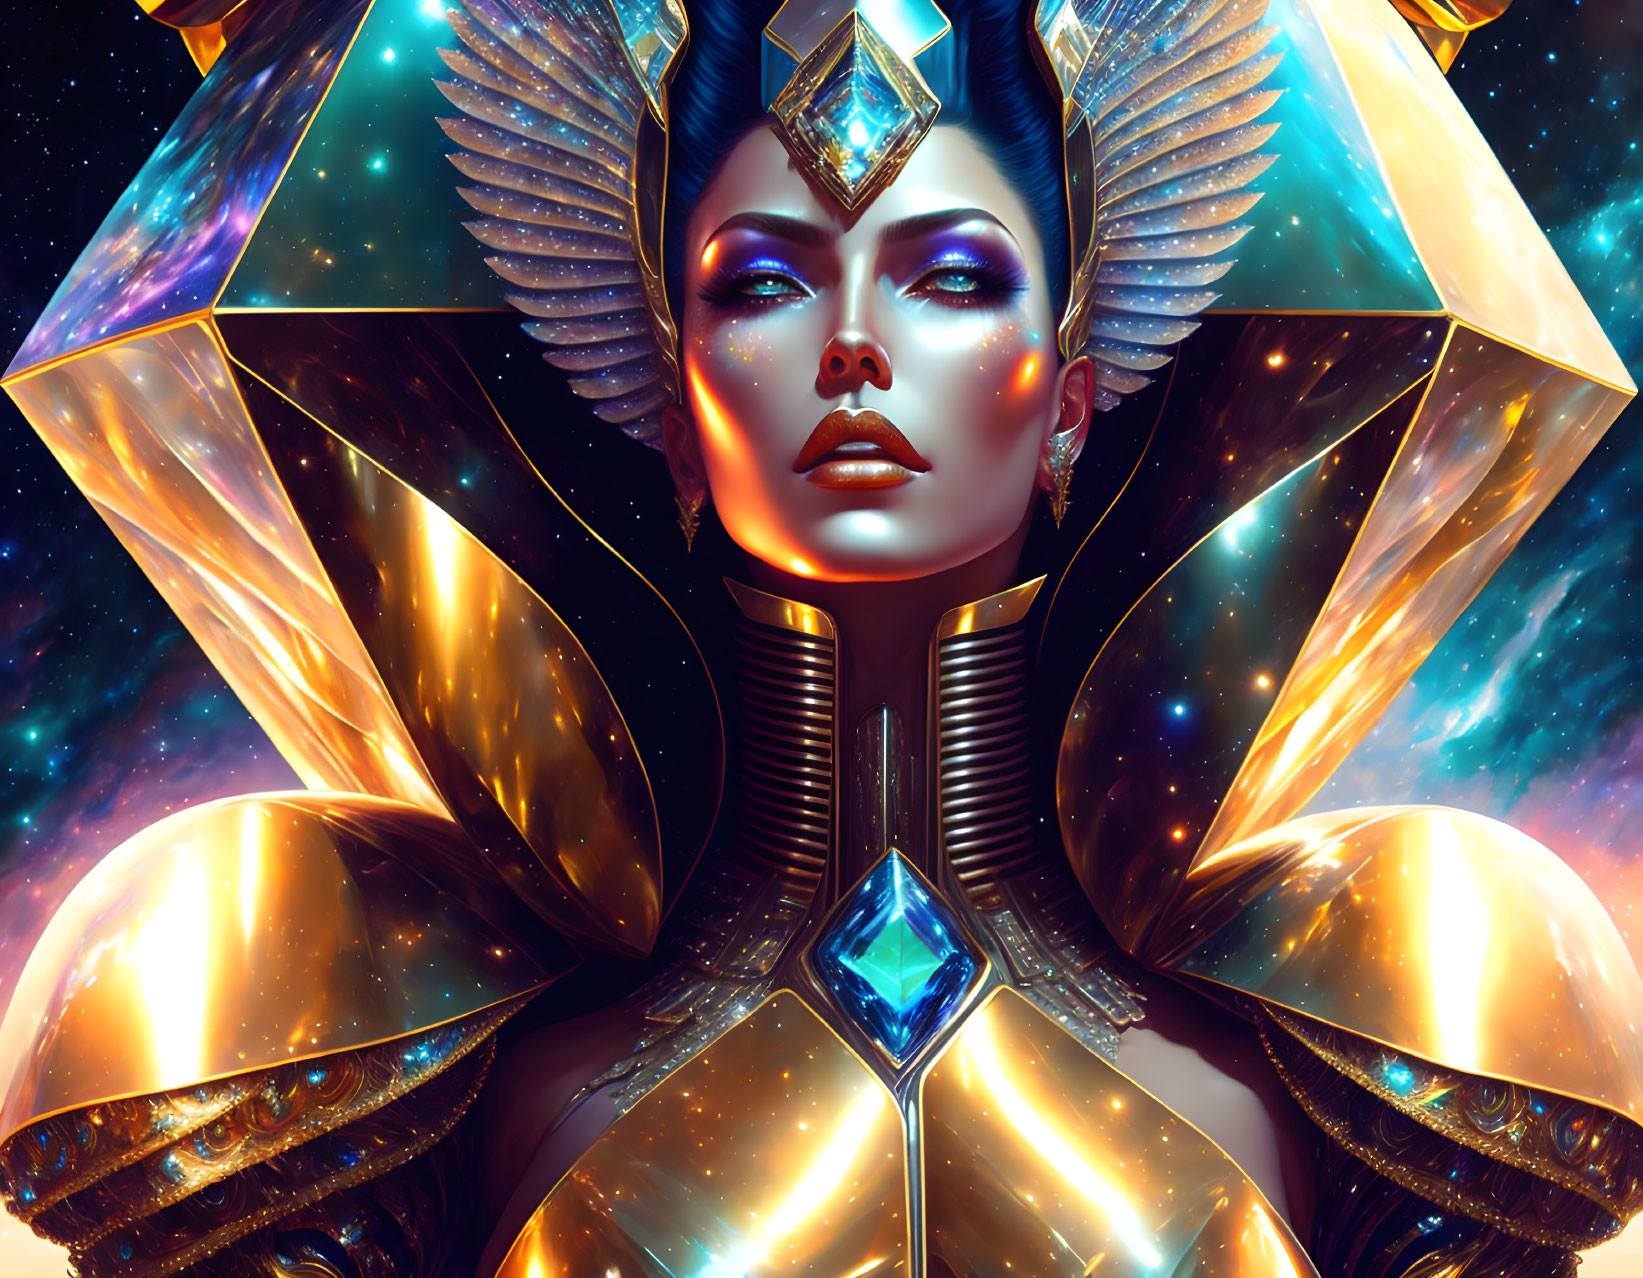 Cosmic-inspired makeup and golden armor on woman against starry backdrop